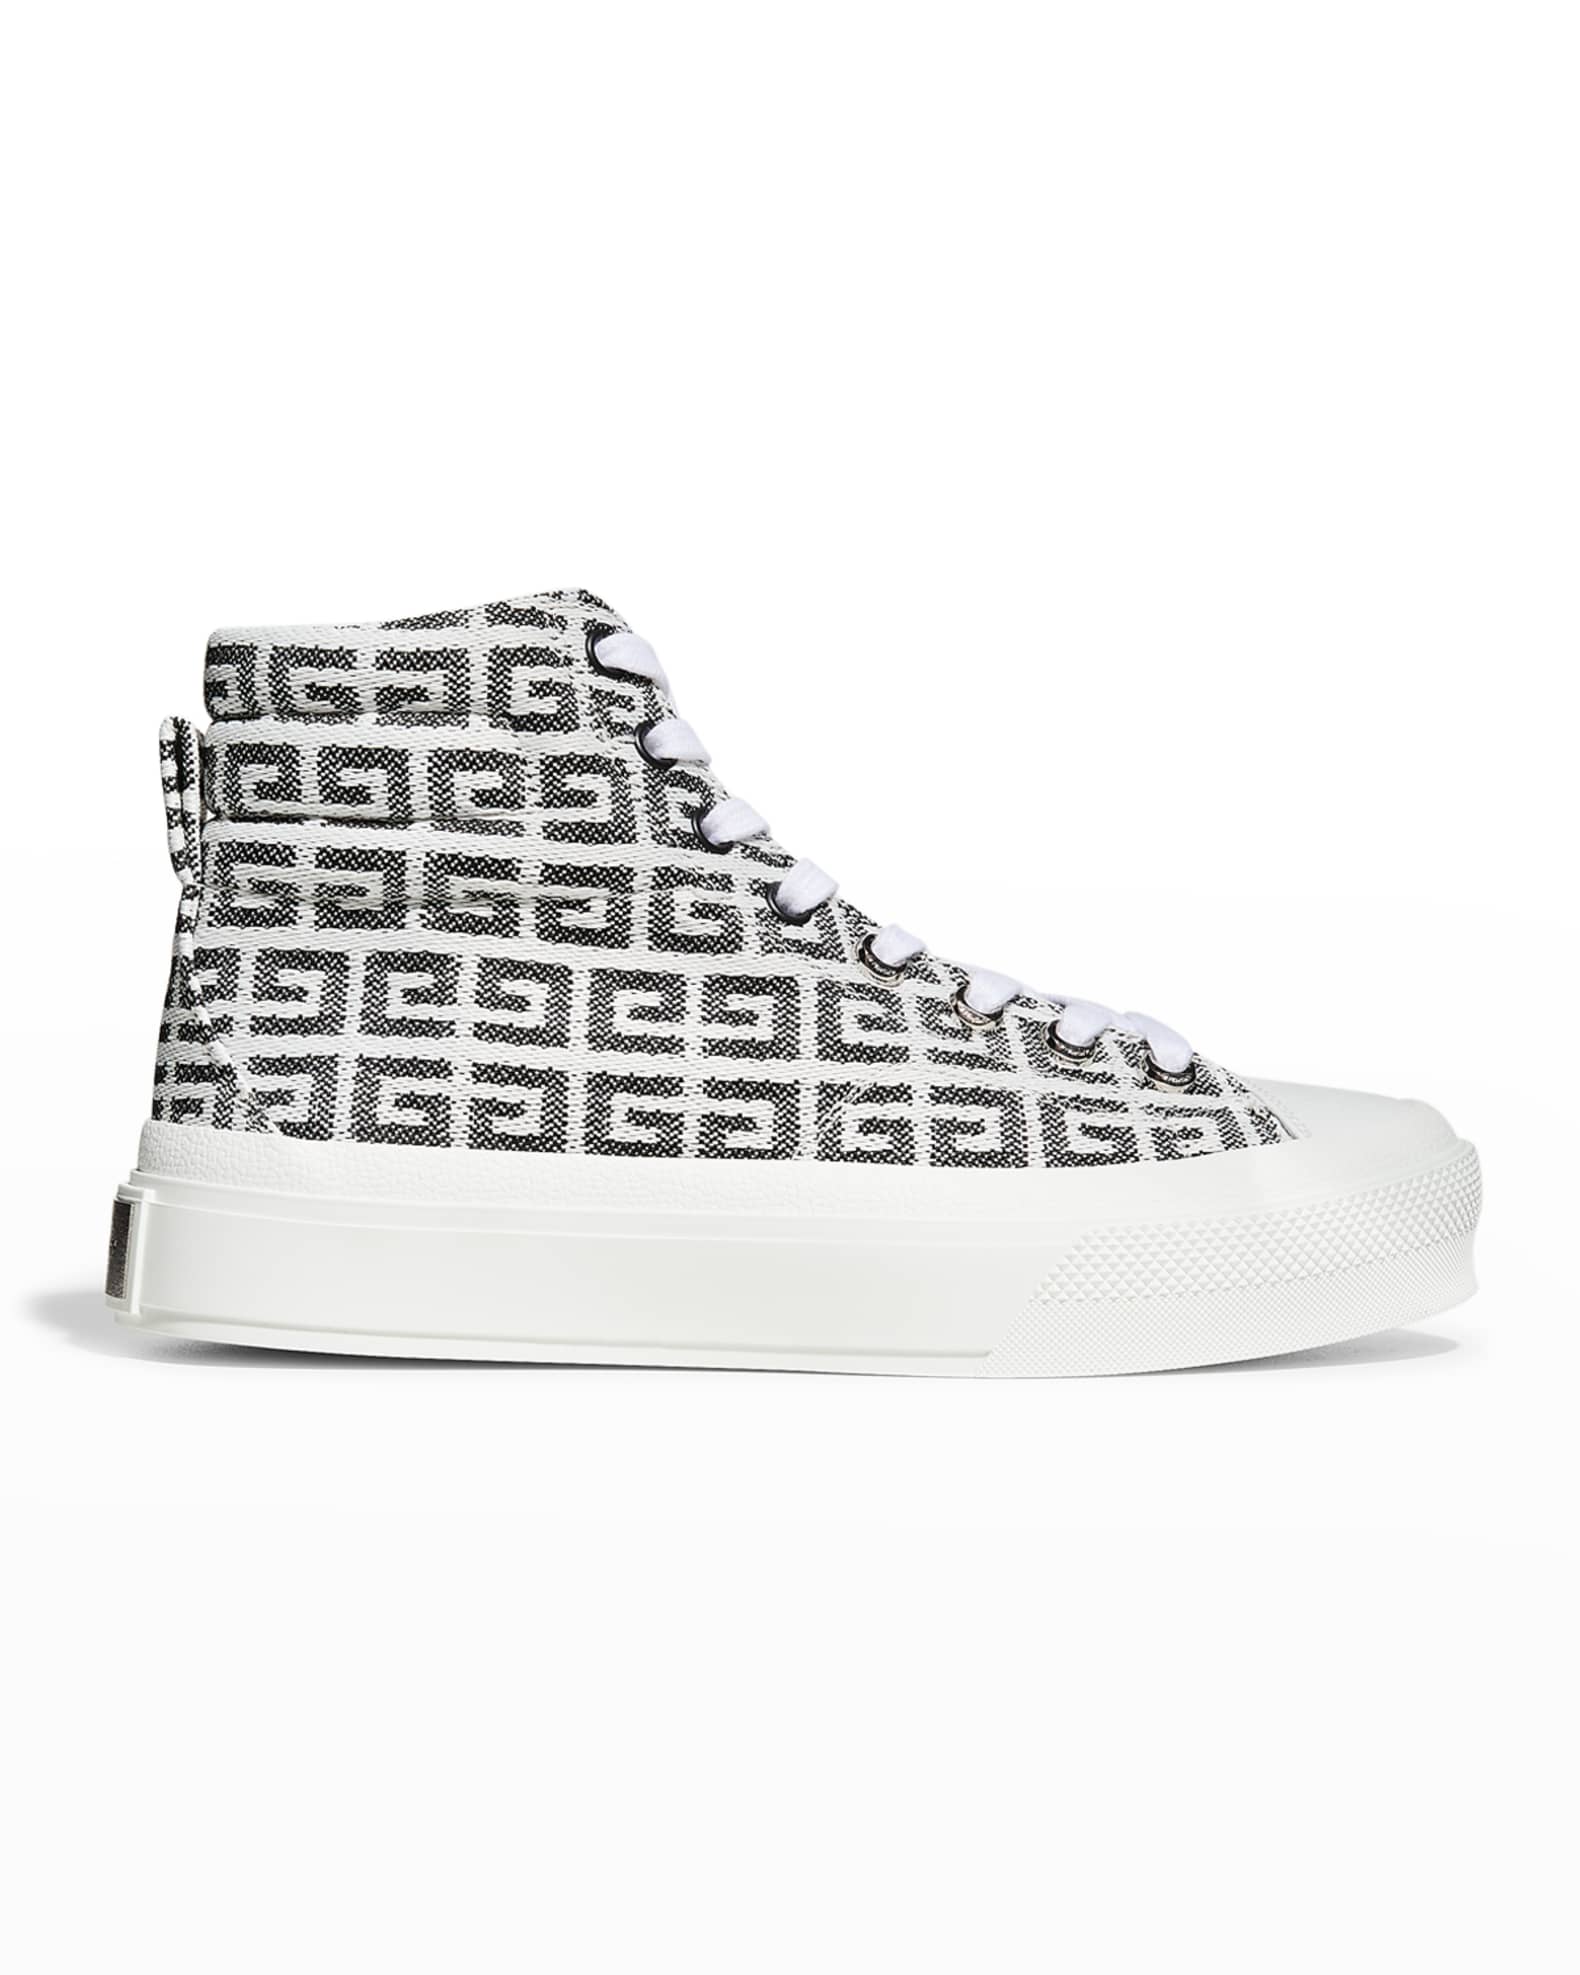 Knipoog muis een keer Givenchy City 4G Jacquard High-Top Sneakers | Neiman Marcus